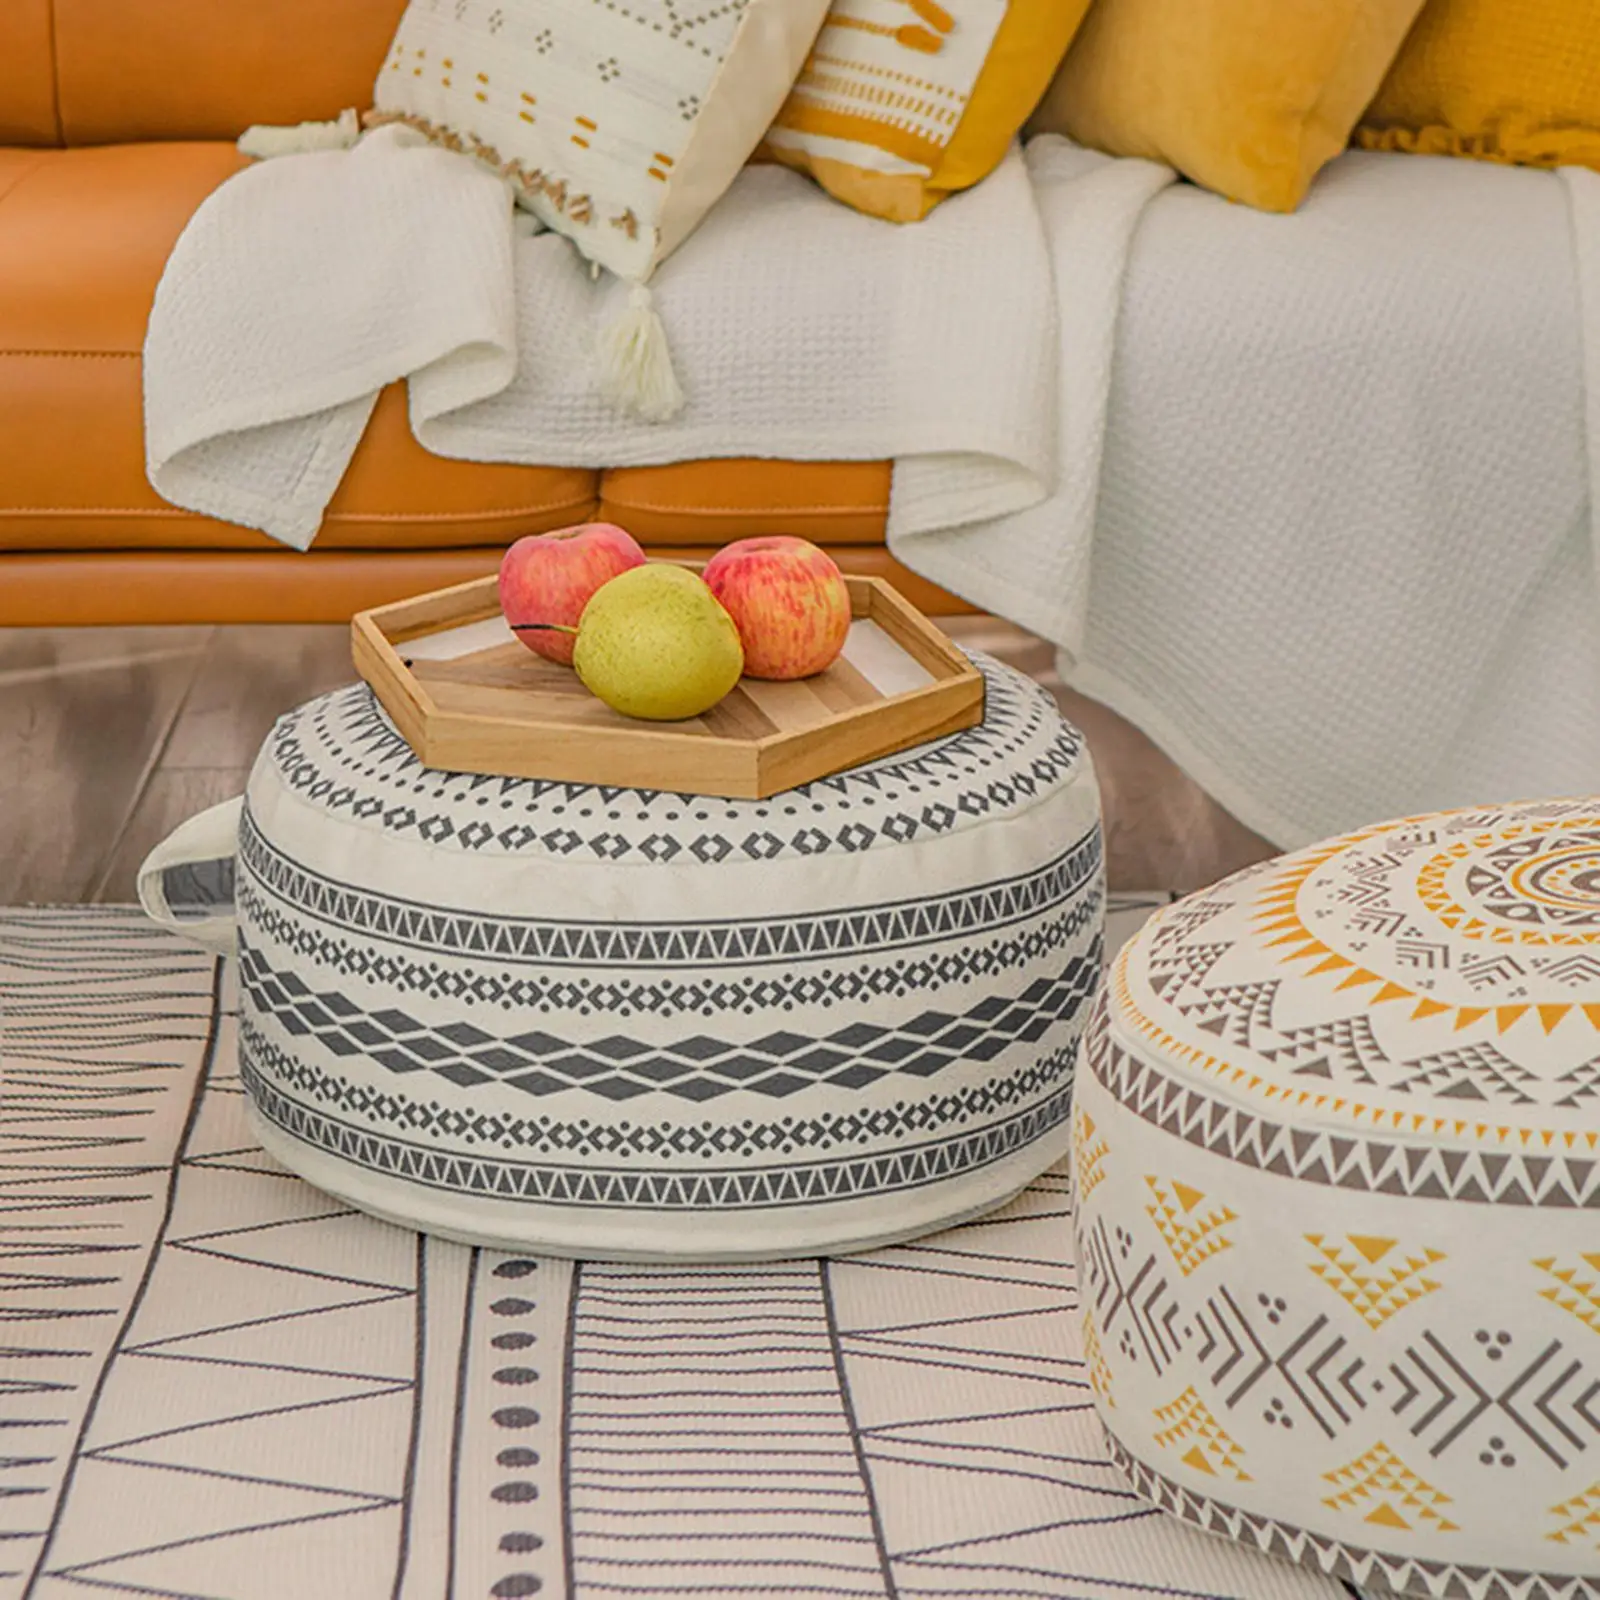 Handmade Woven Pouf Cover Embroider Craft Bedroom Decor Decorative Floor Cushion Seat Unstuffed Footstool Cover Chair